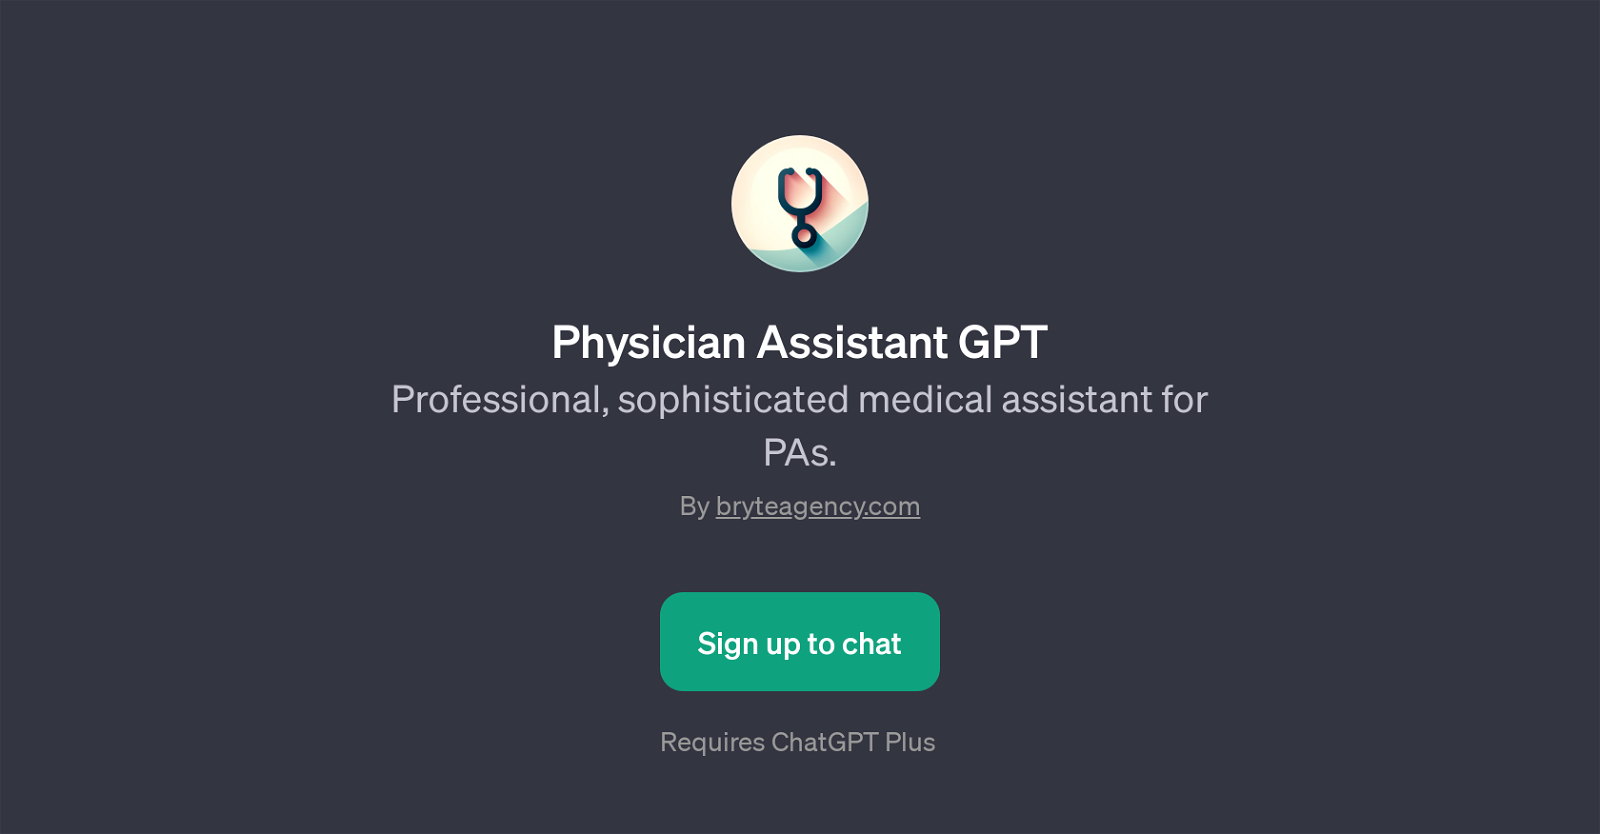 Physician Assistant GPT website